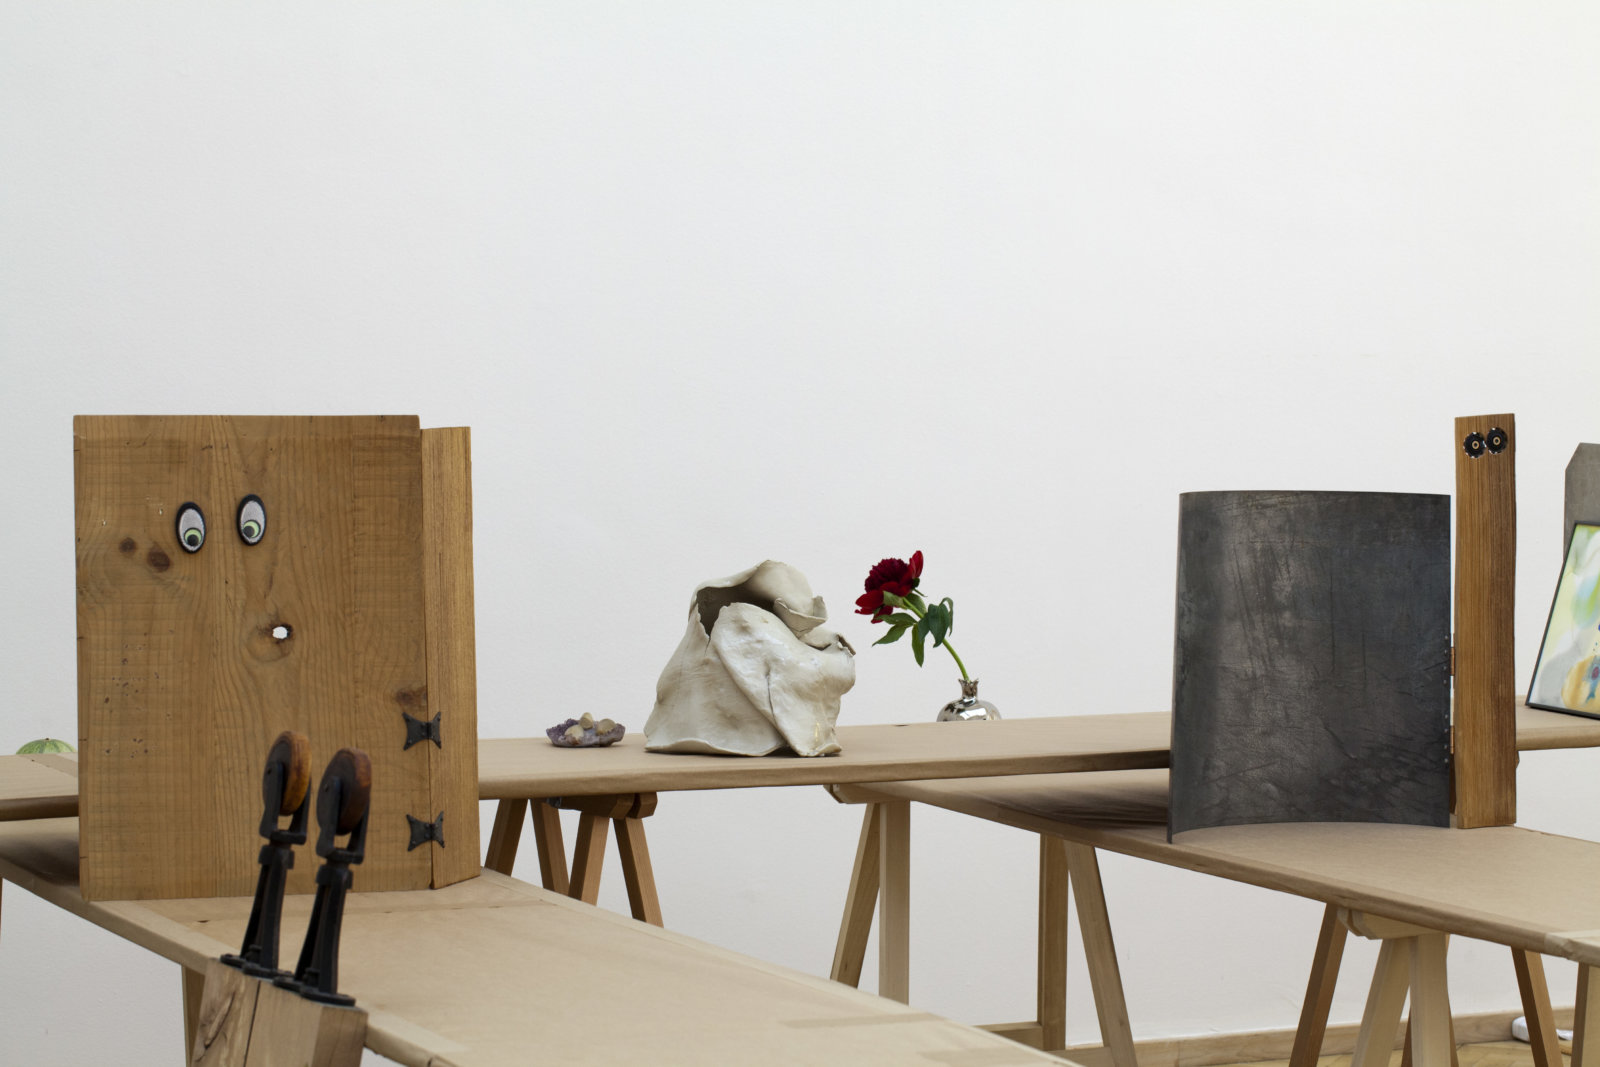 Christina Mackie, Trestle People, 2012, mixed media, dimensions variable. Installation view, Painting the Weights, Kunsthal Charlottenborg, Copenhagen, 2012